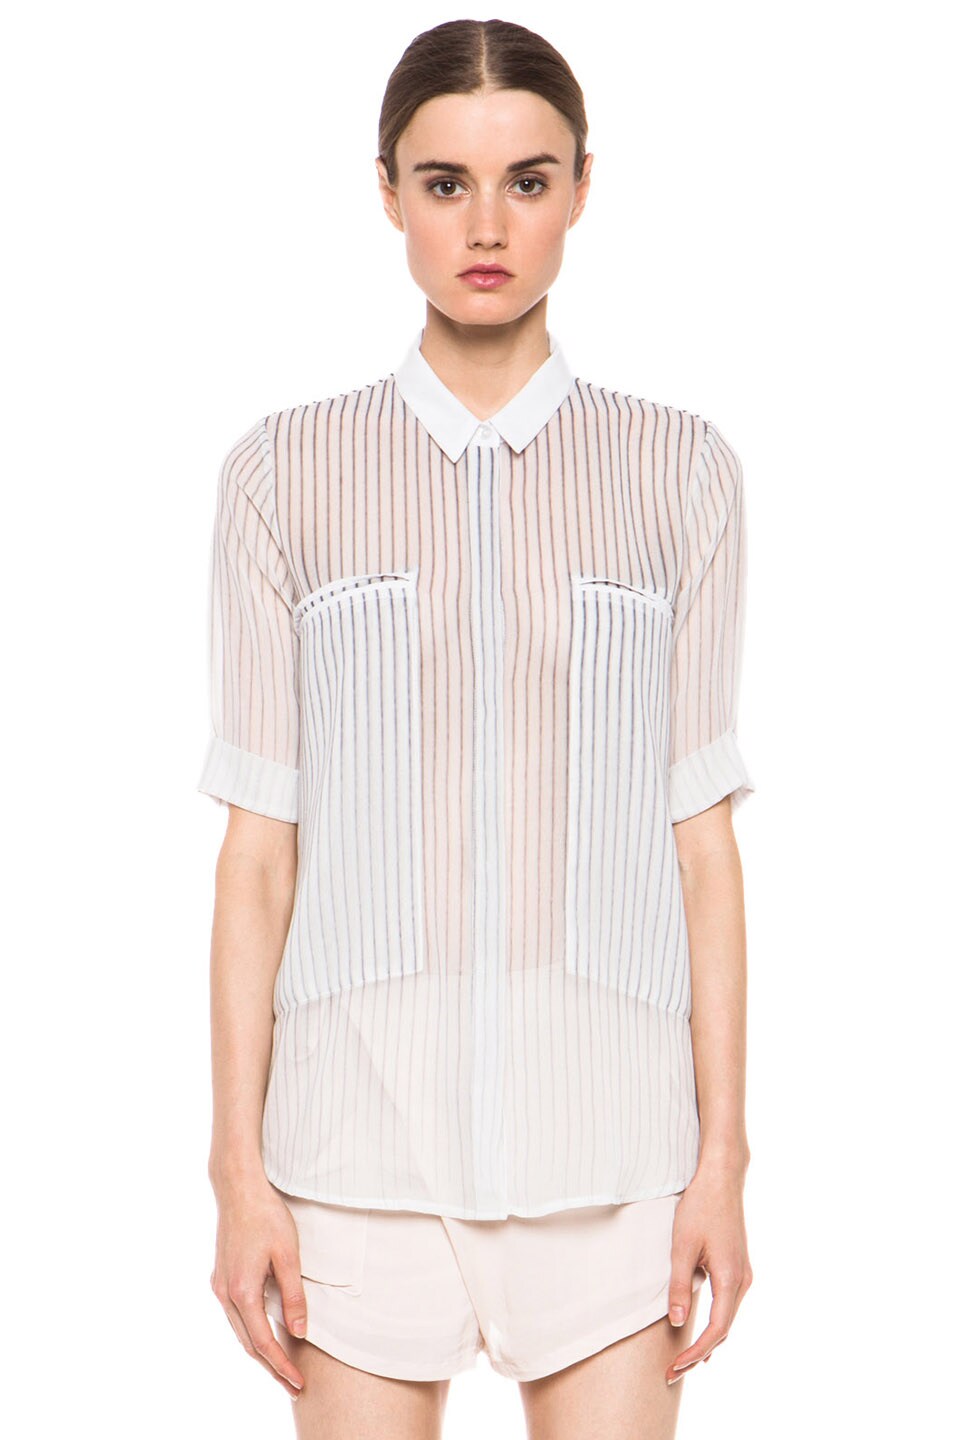 Image 1 of Kimberly Ovitz Suan Top in Scratch Stripe